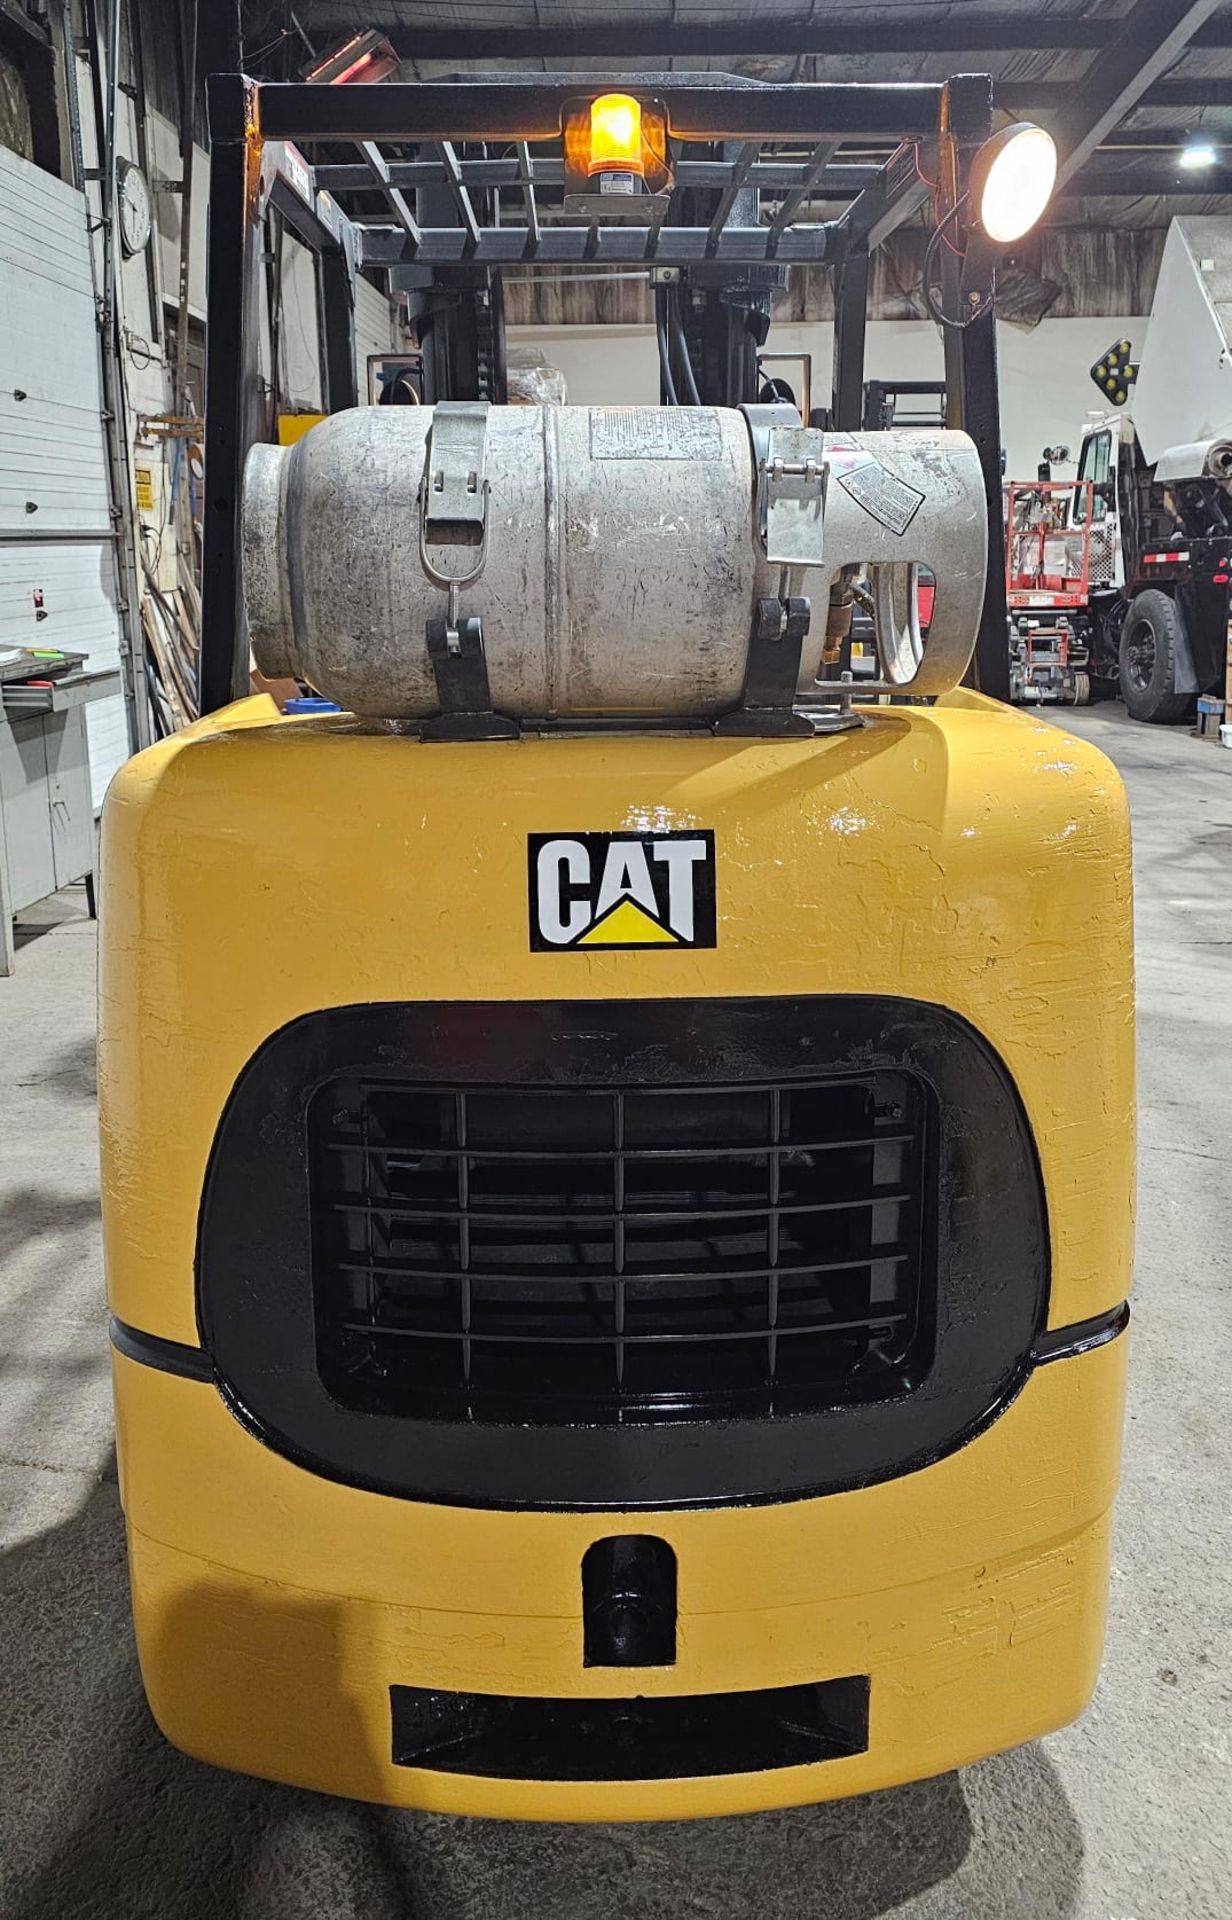 CAT 9,000lbs Capacity LPG (Propane) Forklift with sideshift & 3-STAGE MAST 209" load height (no tank - Image 3 of 5